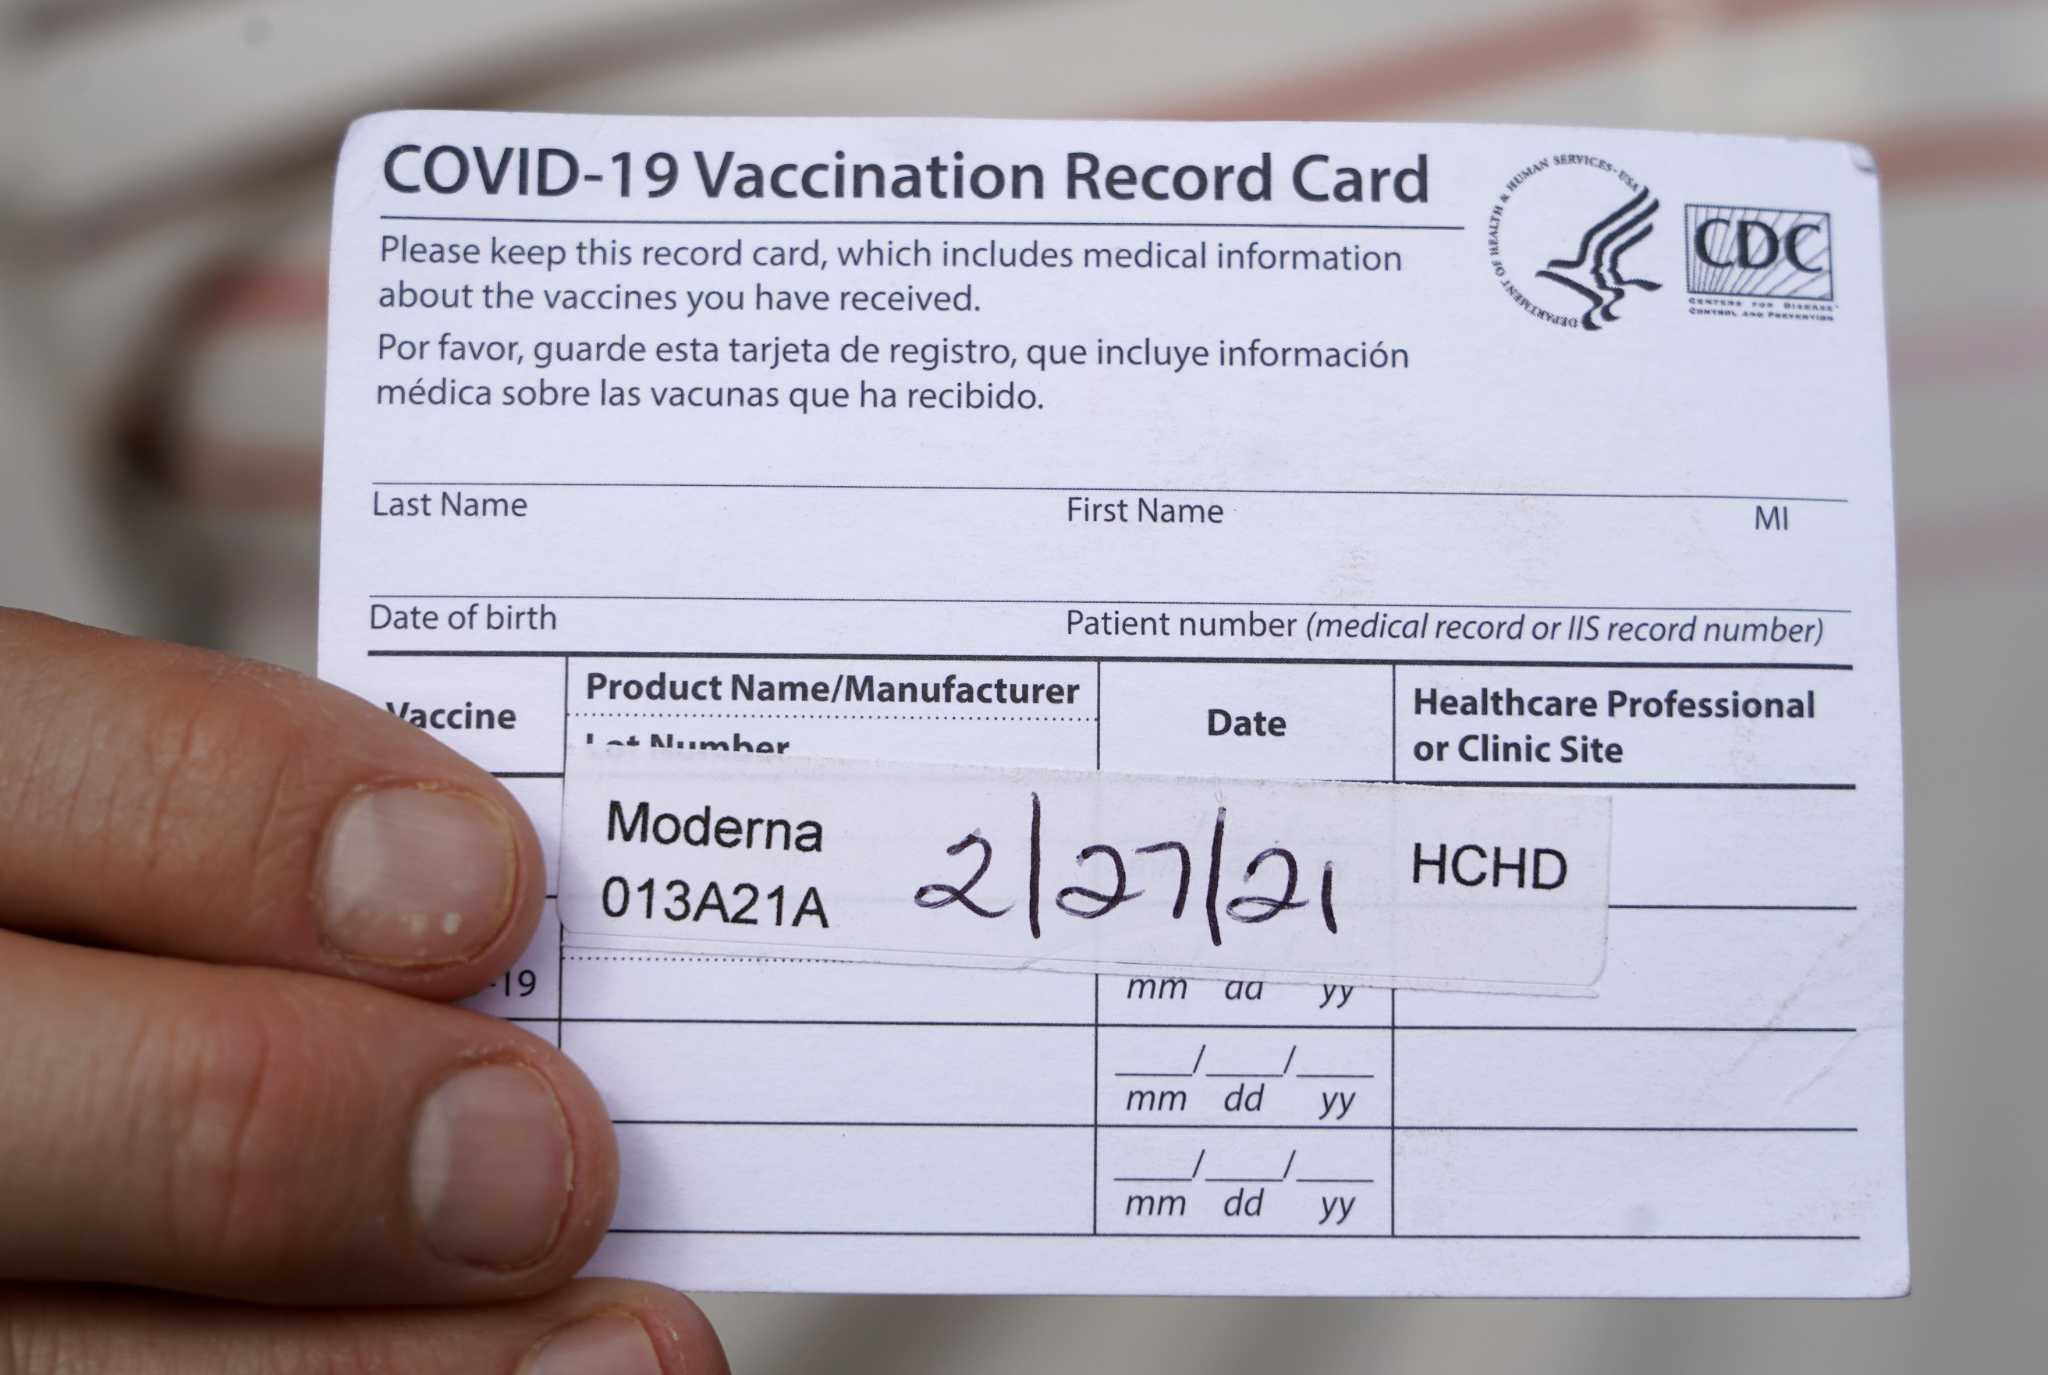 Office Depot, Staples to laminate COVID vaccination cards for free